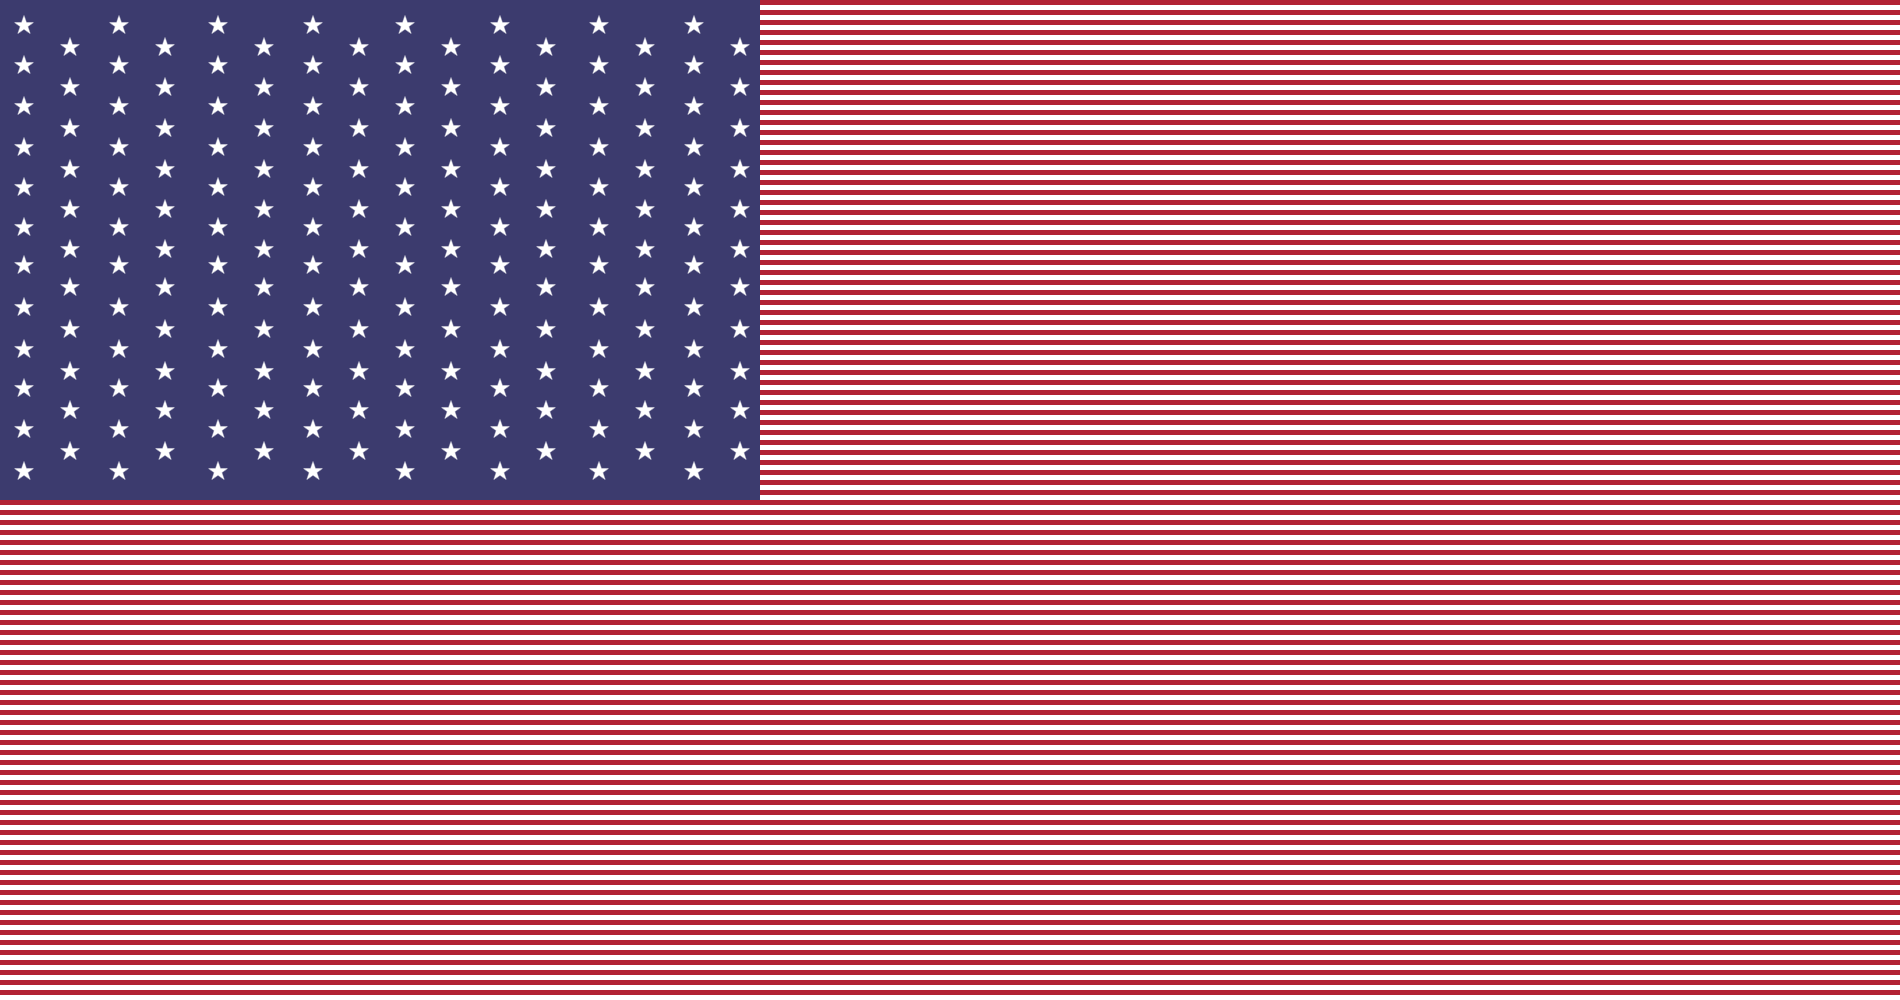 stars_and_stripes_forever_by_spiritswriter123-dcm9kgz.png